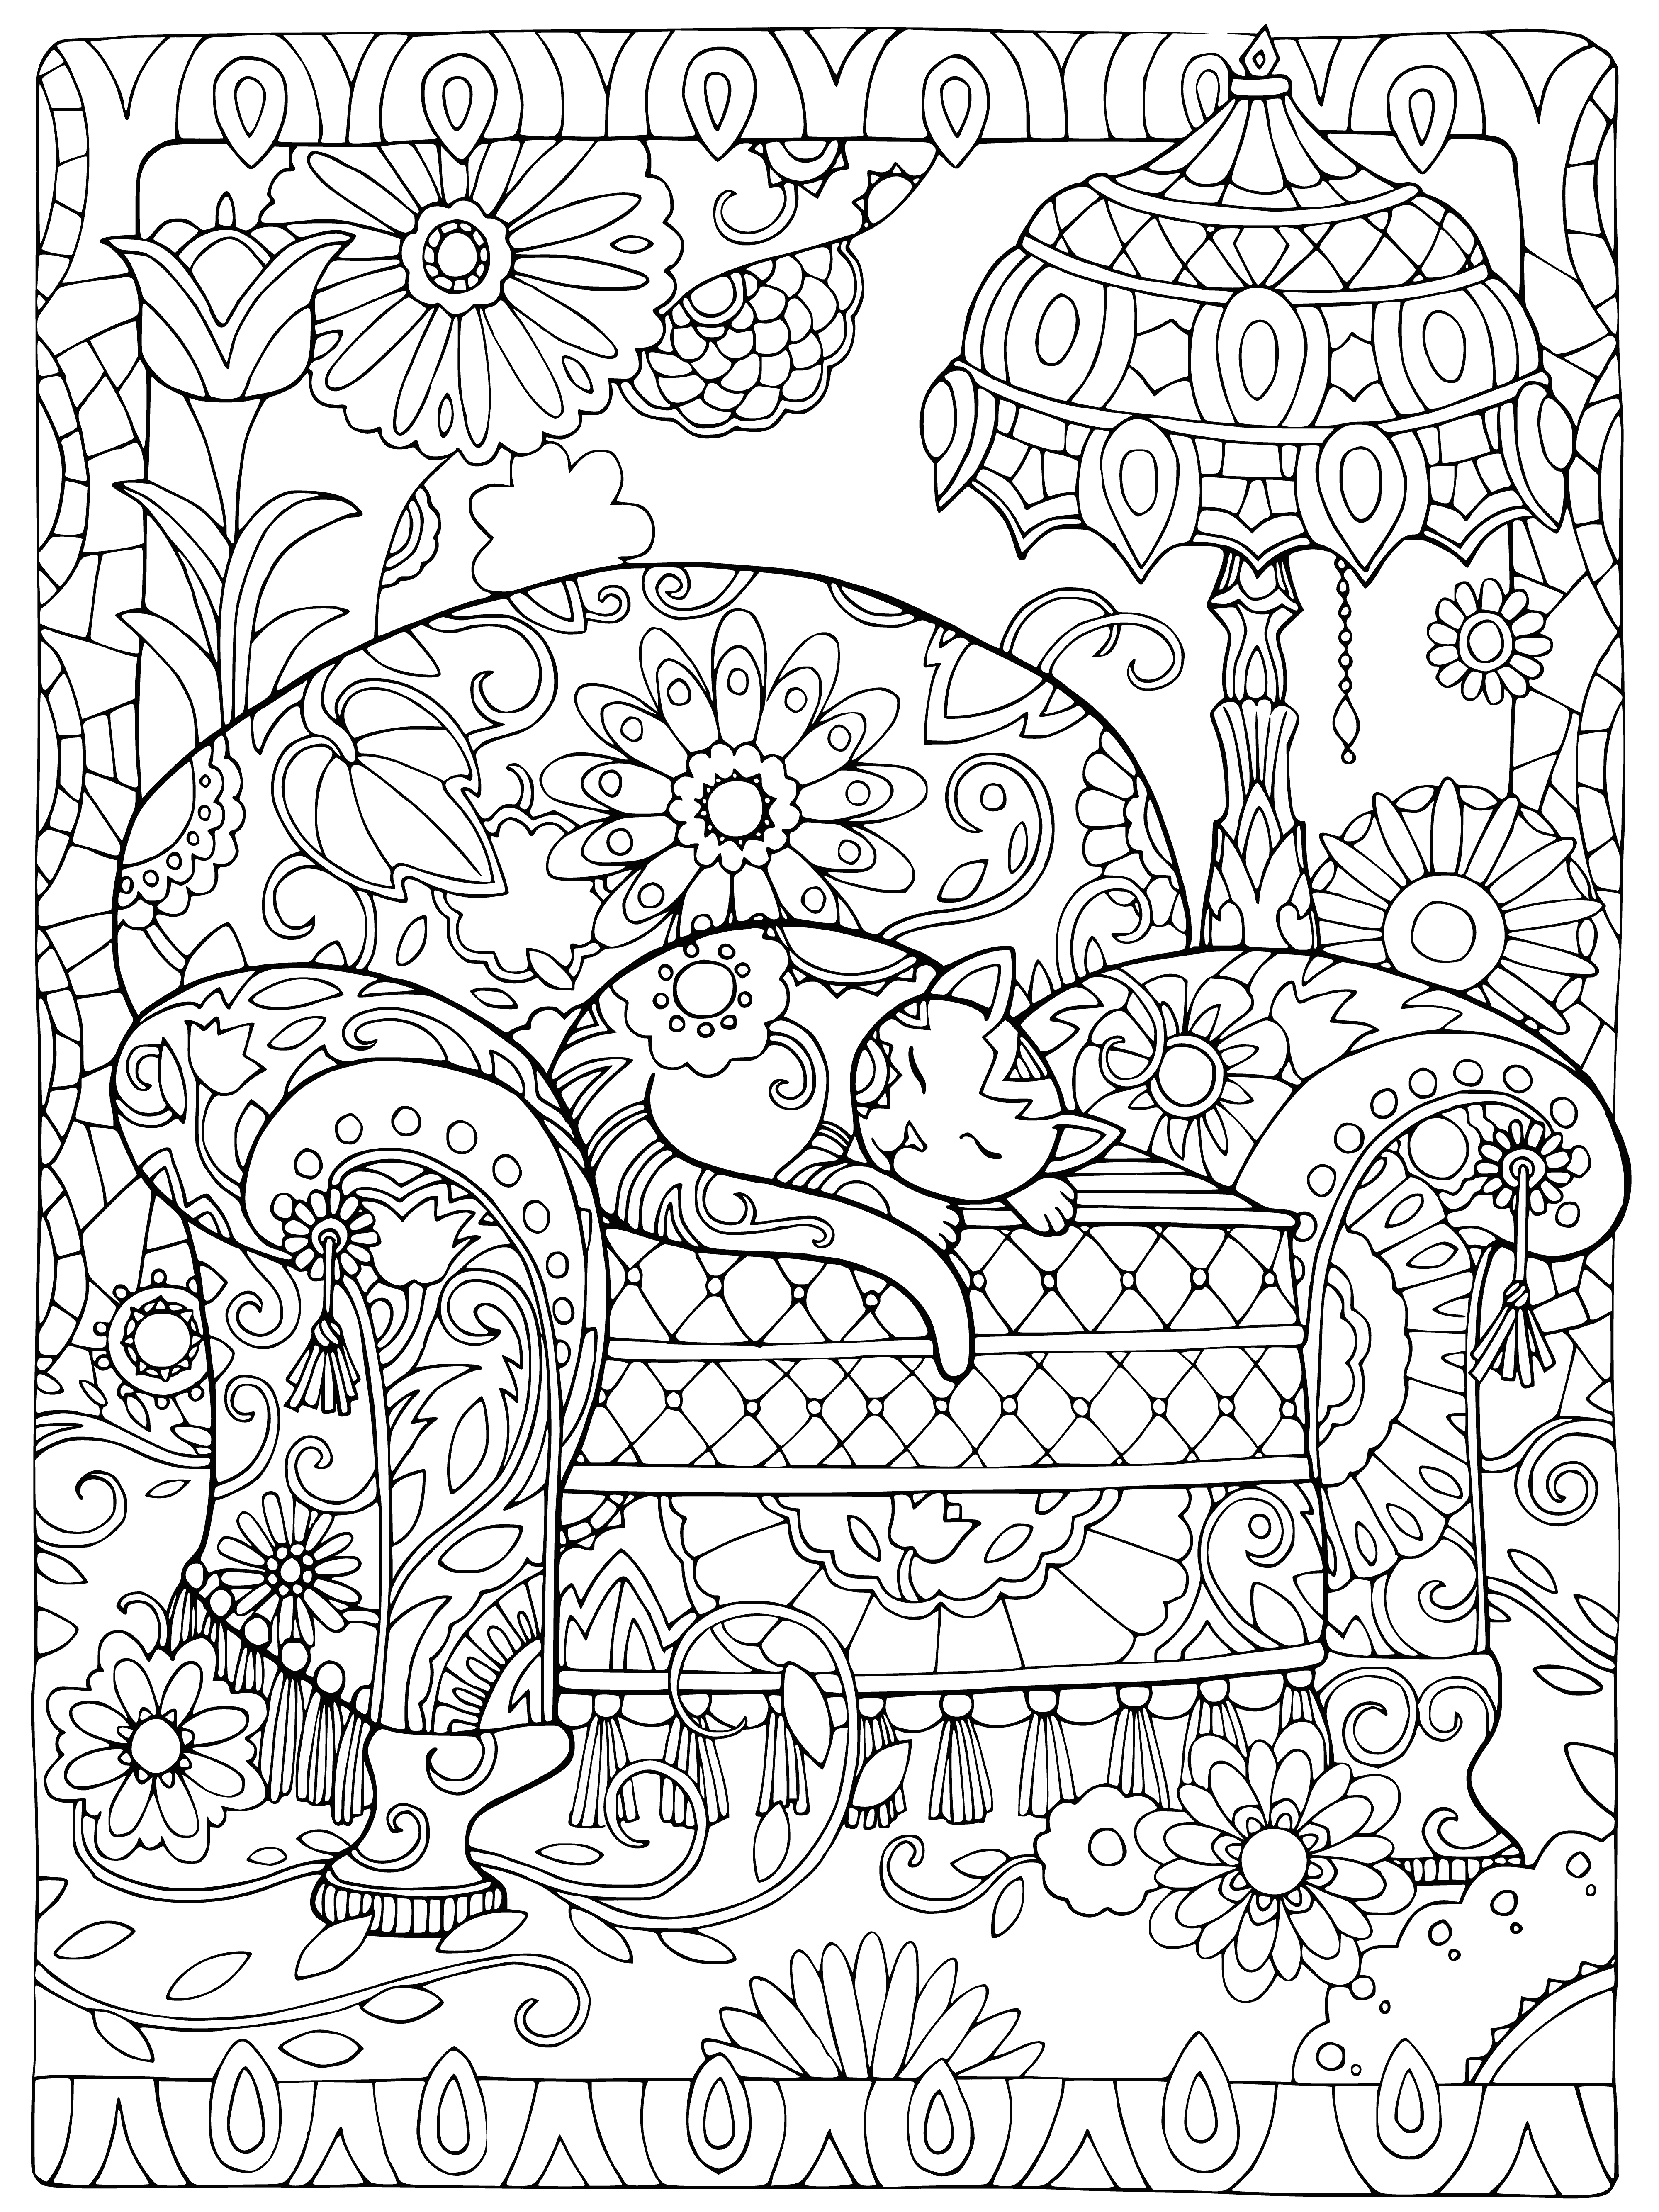 Cat on the couch coloring page